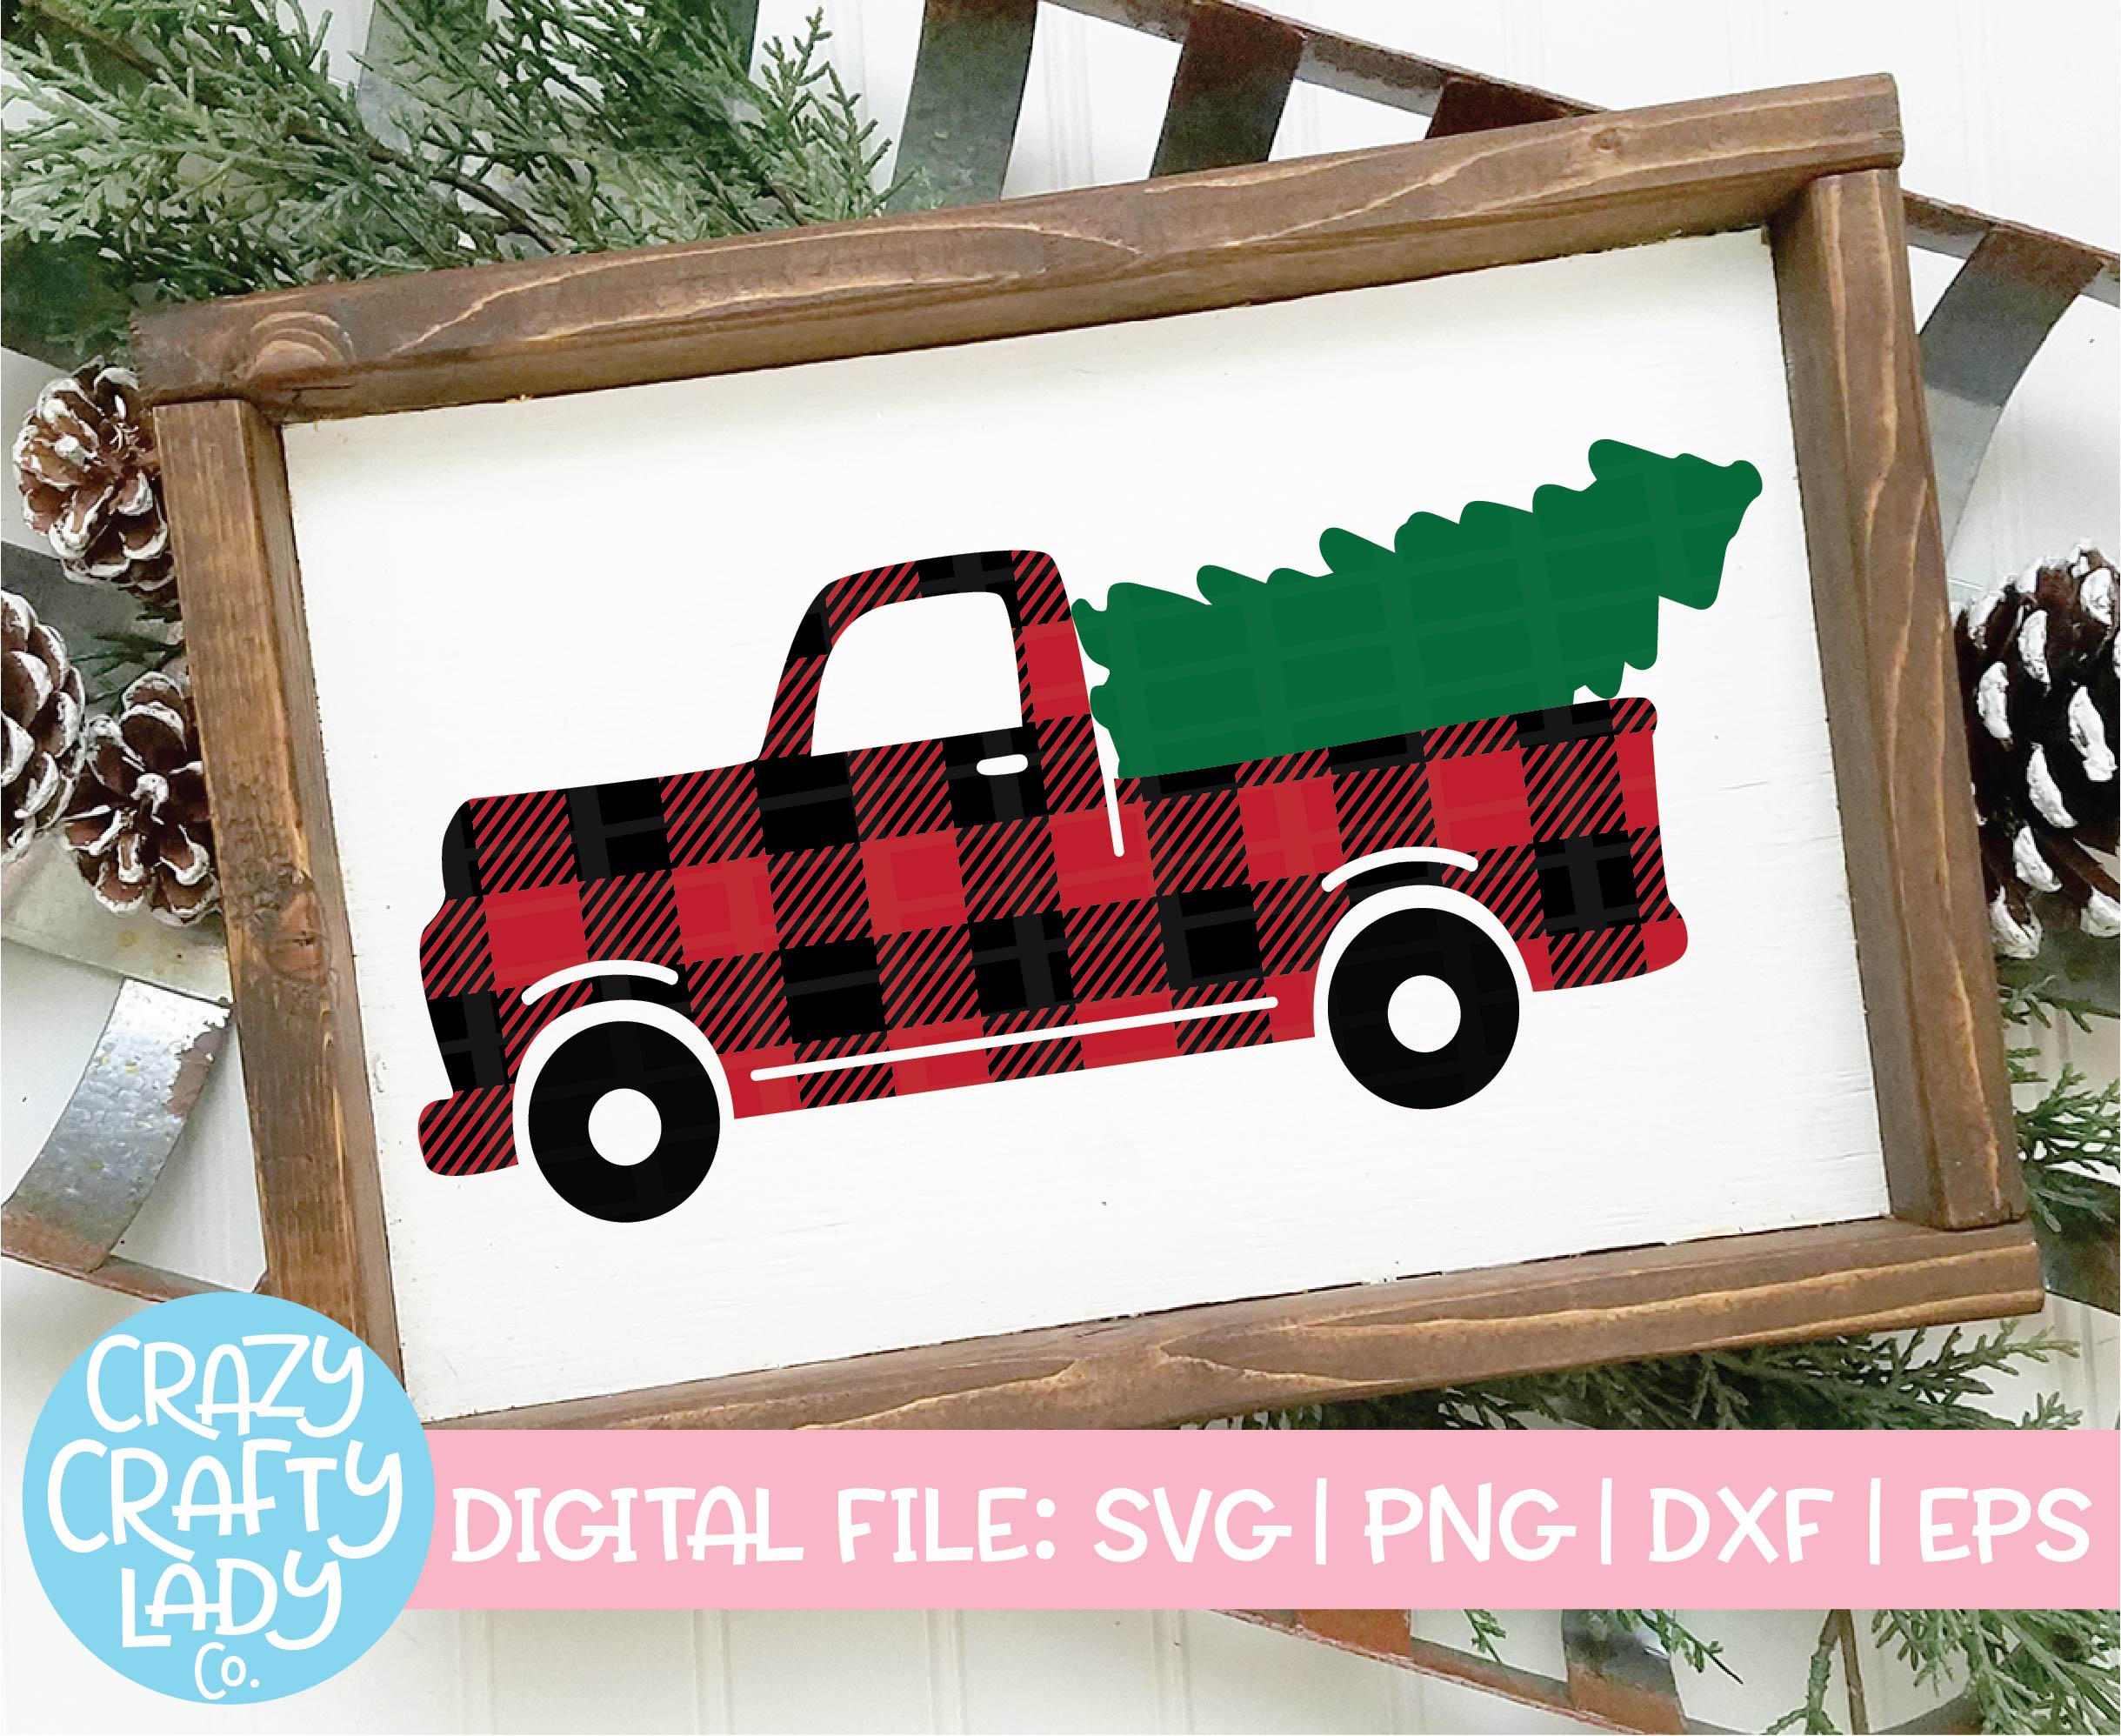 Download Buffalo Plaid Christmas Tree Truck Svg Cut File Crazy Crafty Lady Co